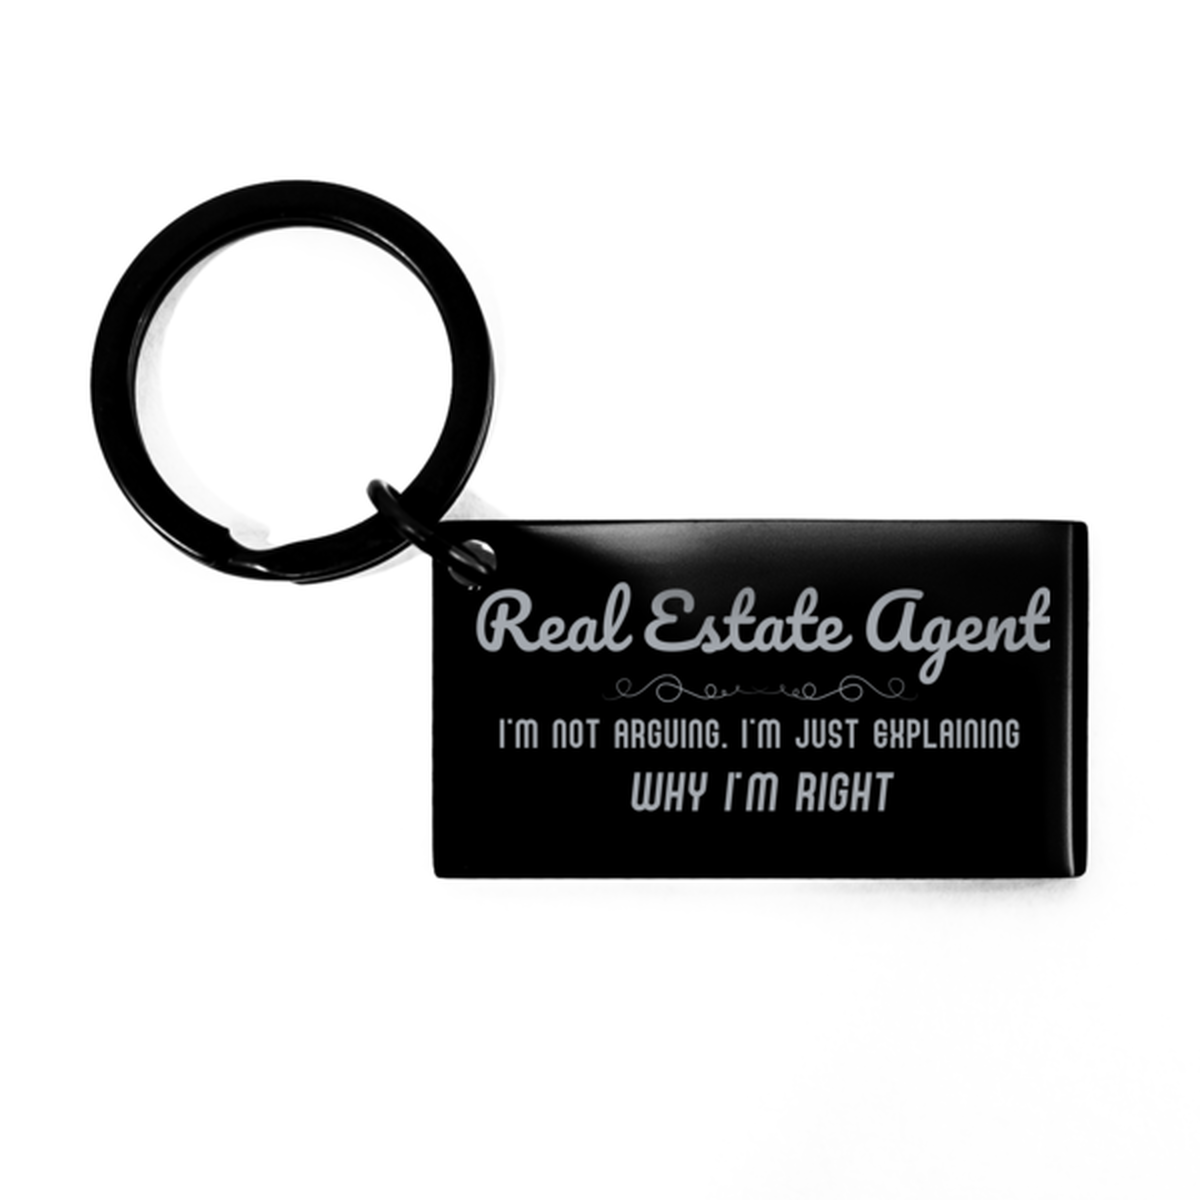 Real Estate Agent I'm not Arguing. I'm Just Explaining Why I'm RIGHT Keychain, Funny Saying Quote Real Estate Agent Gifts For Real Estate Agent Graduation Birthday Christmas Gifts for Men Women Coworker